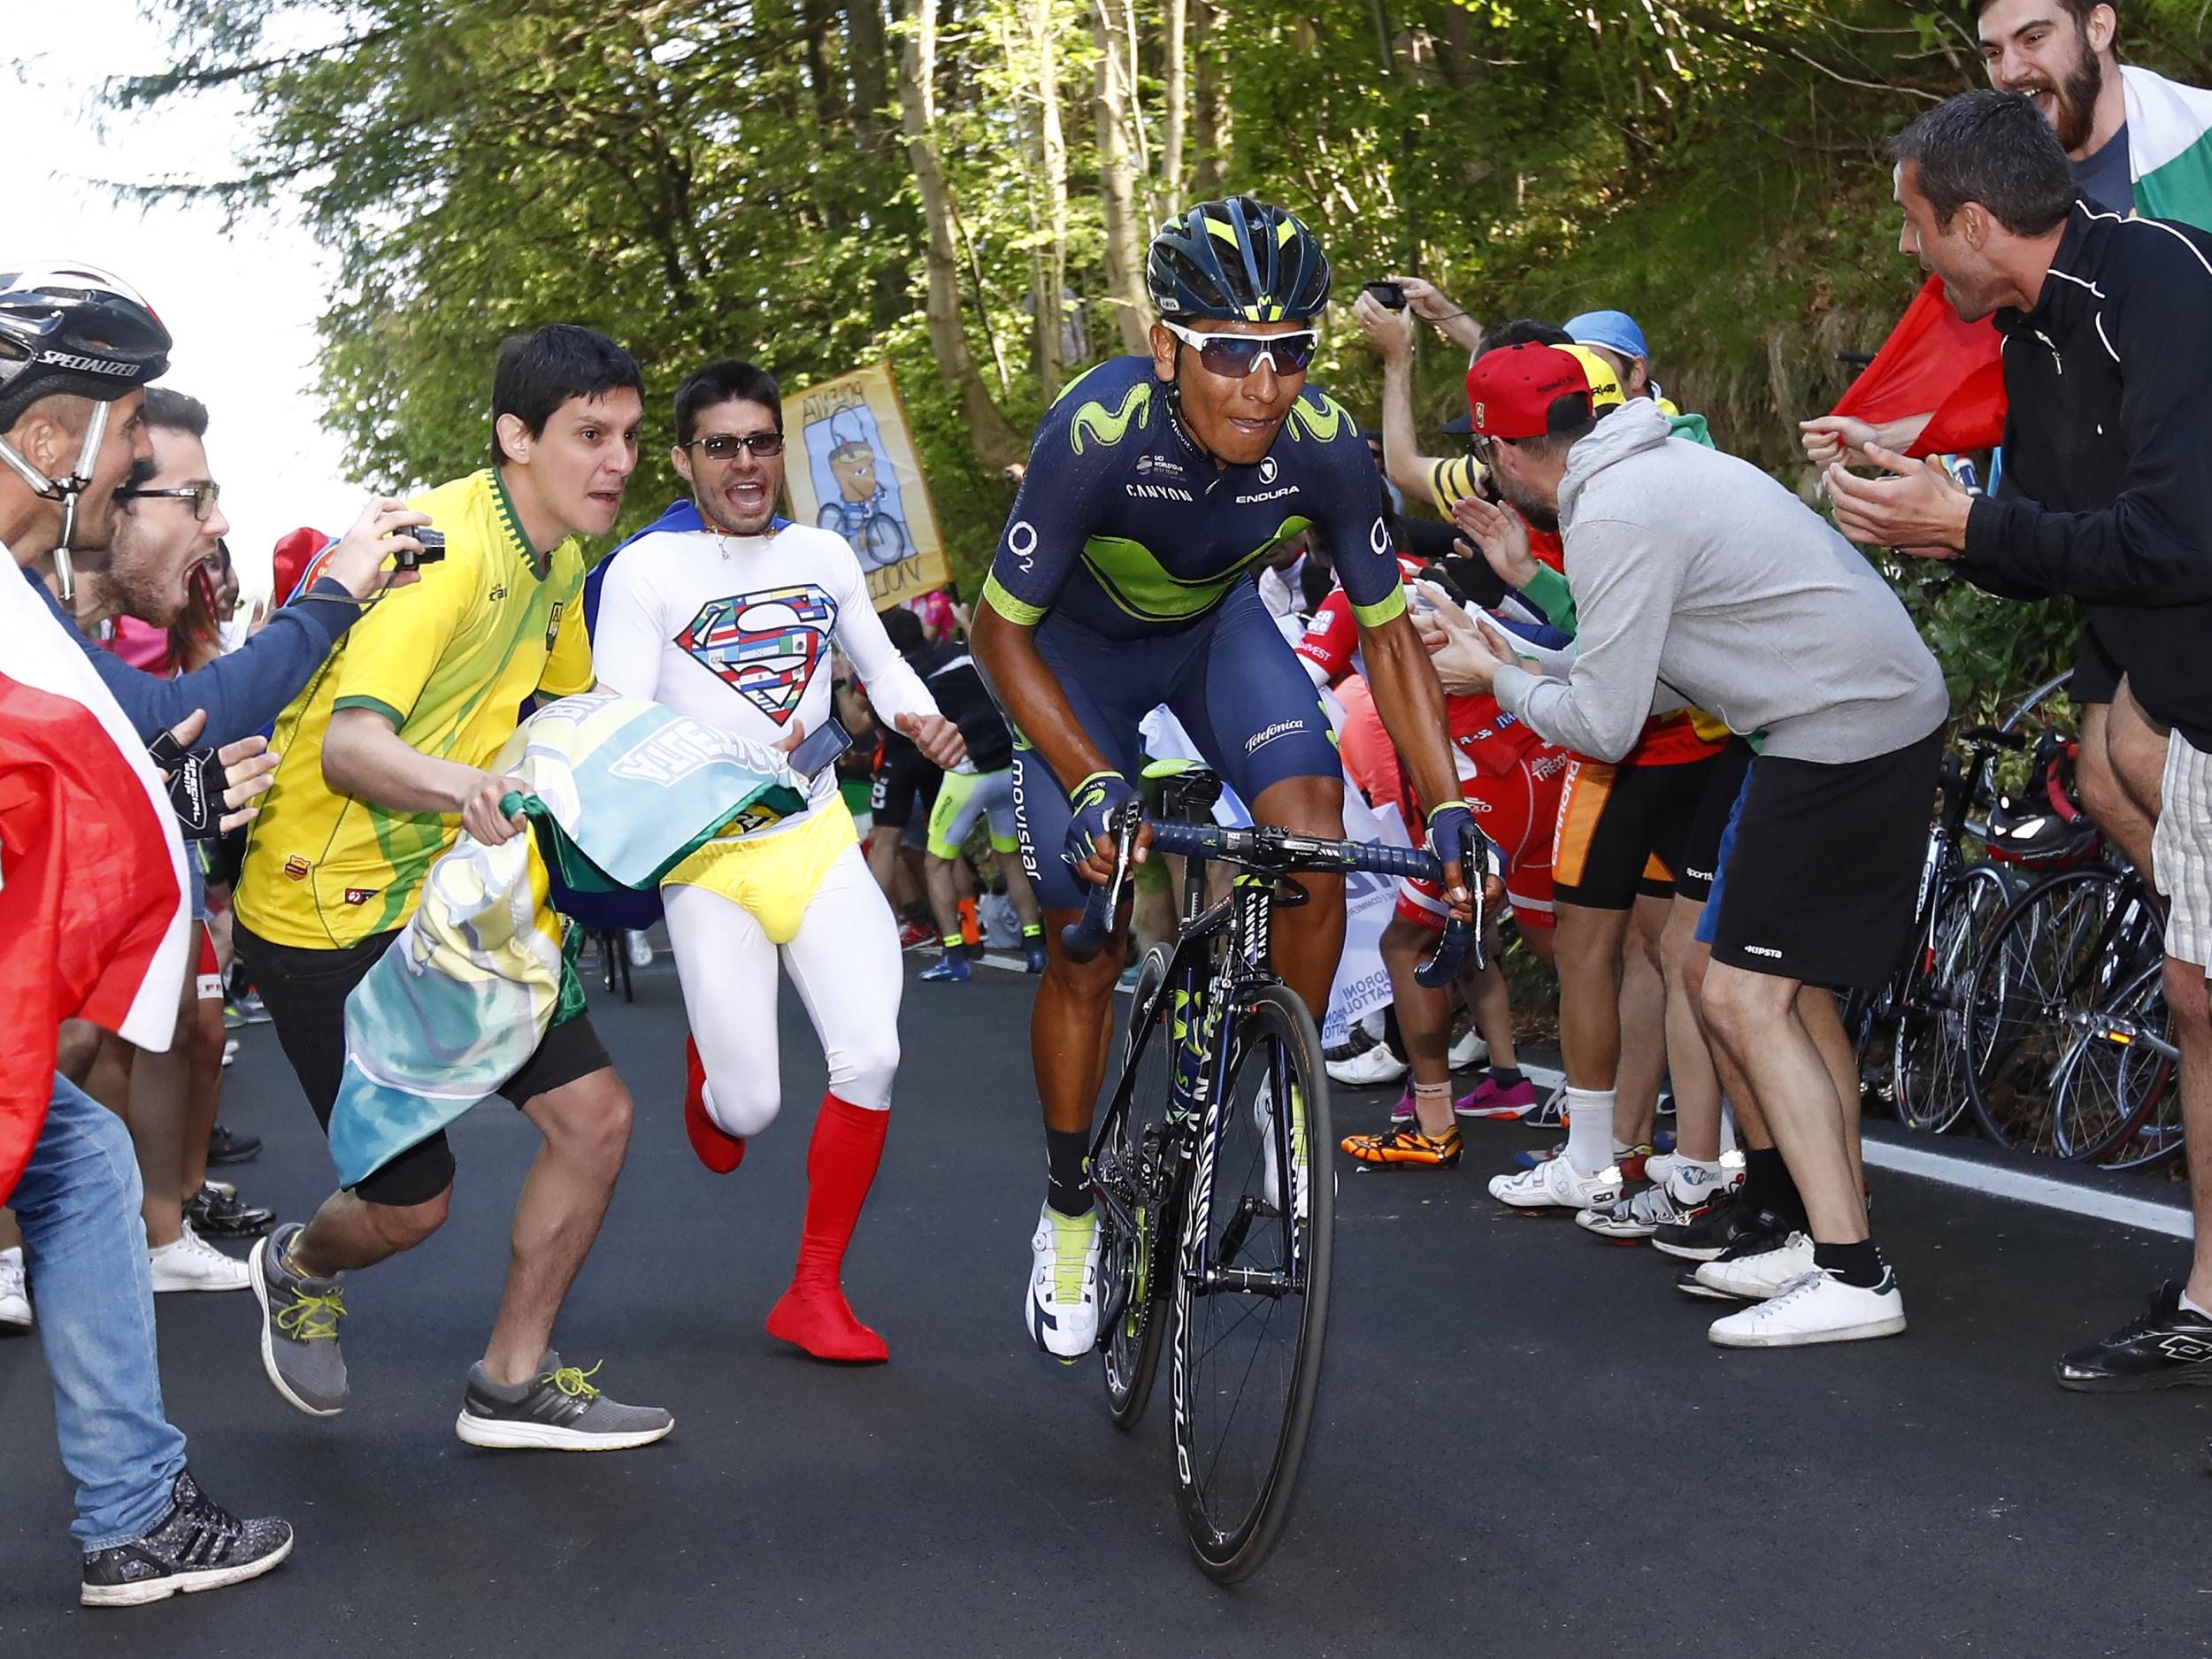 Quintana launched a breakaway but ran out of gas